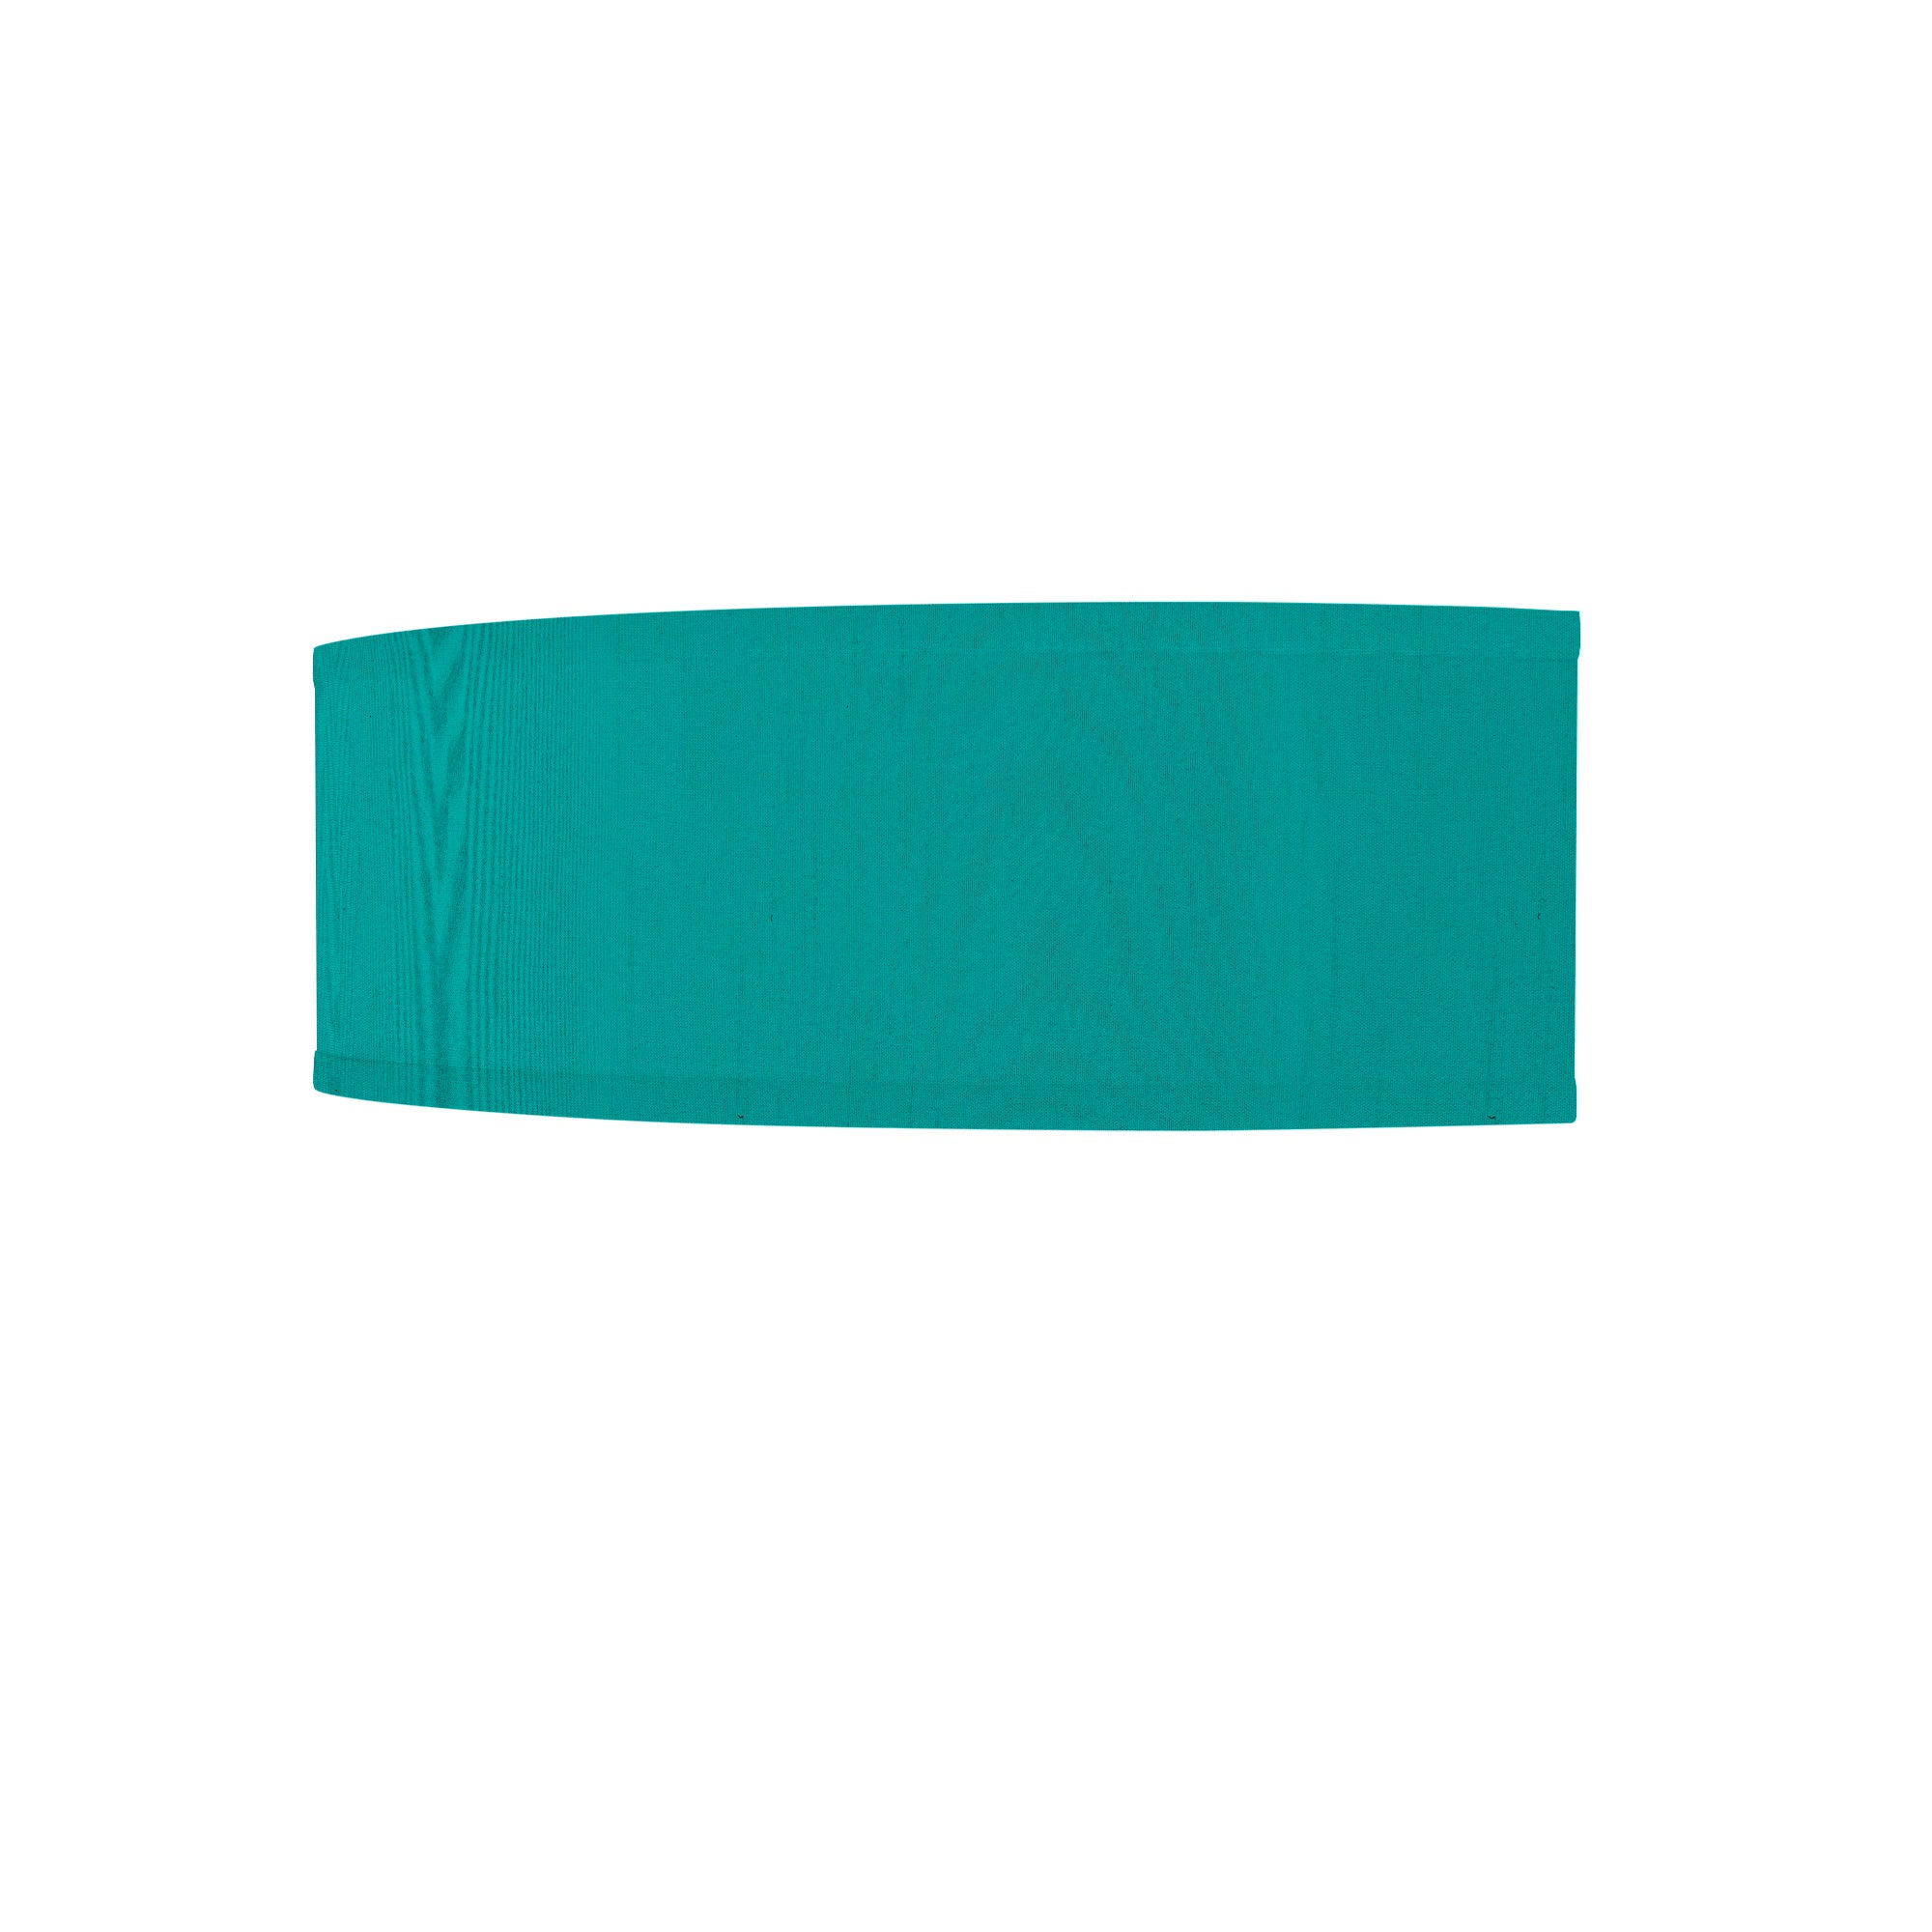 The Mora Wall Sconce from Seascape Fixtures with a silk shade in turquoise color.